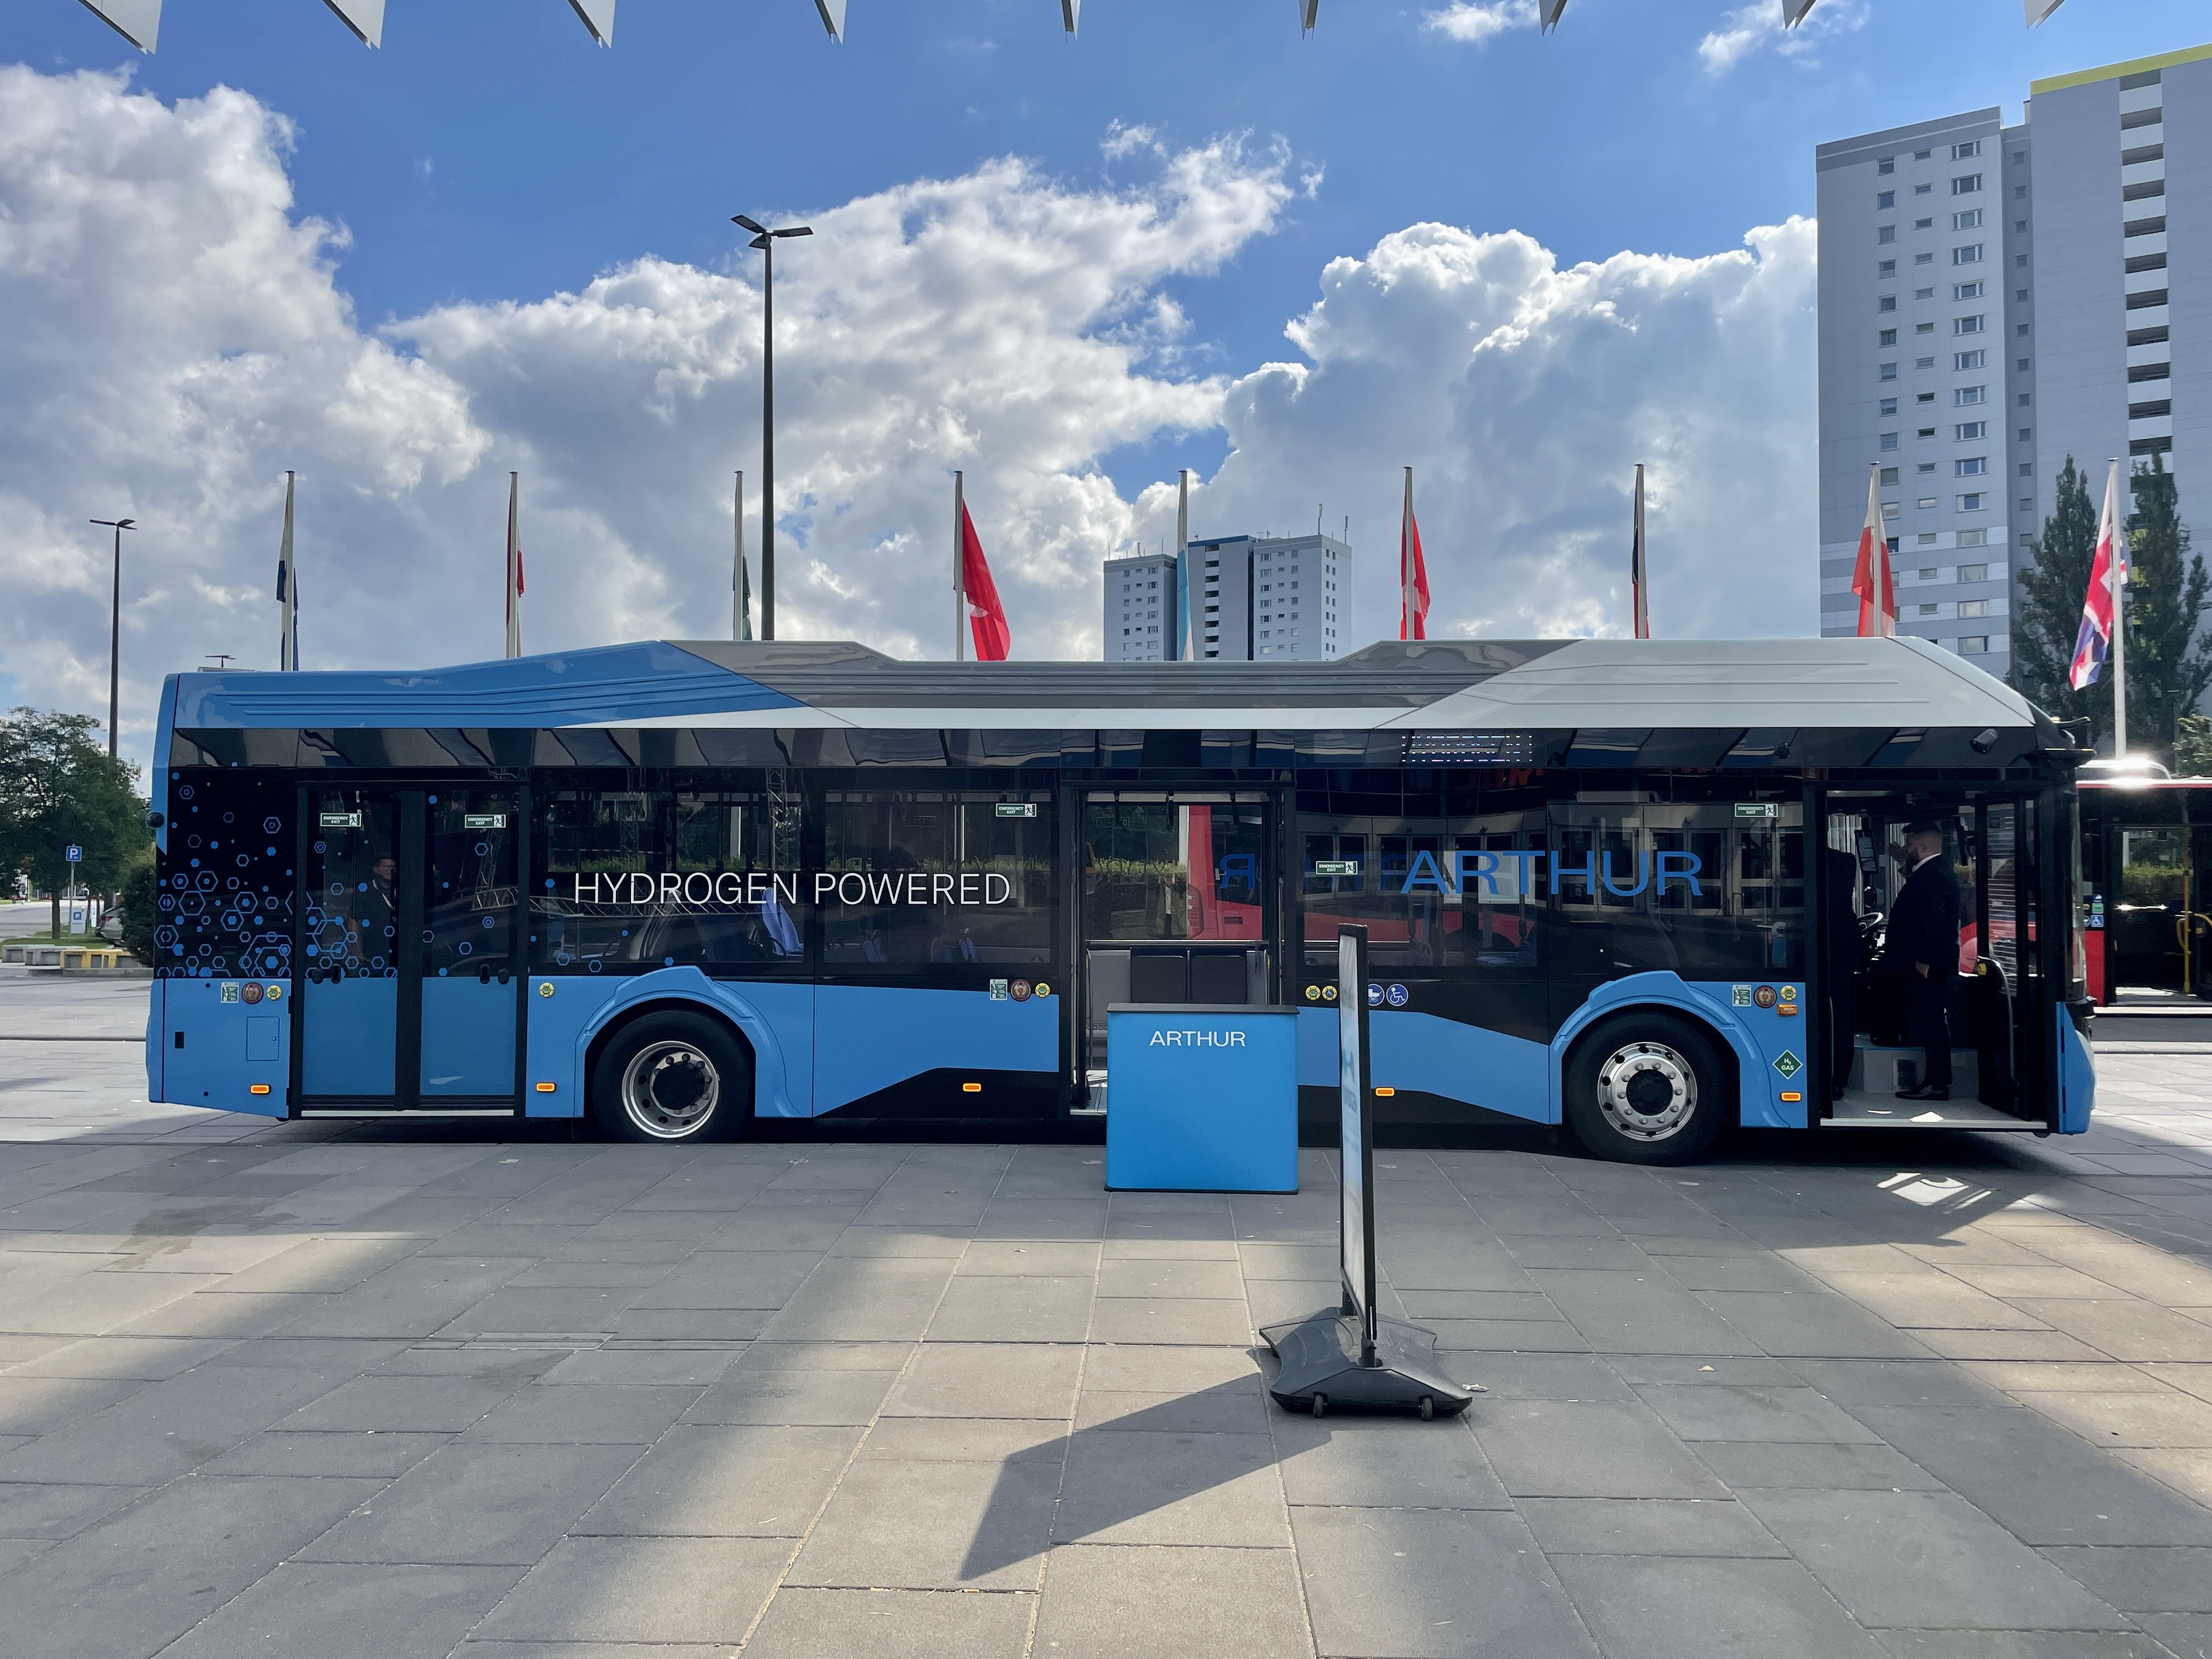 Germany's federal states have begun investing in fuel cell powered buses with hydrogen storage units./Natalie Carney/CGTN